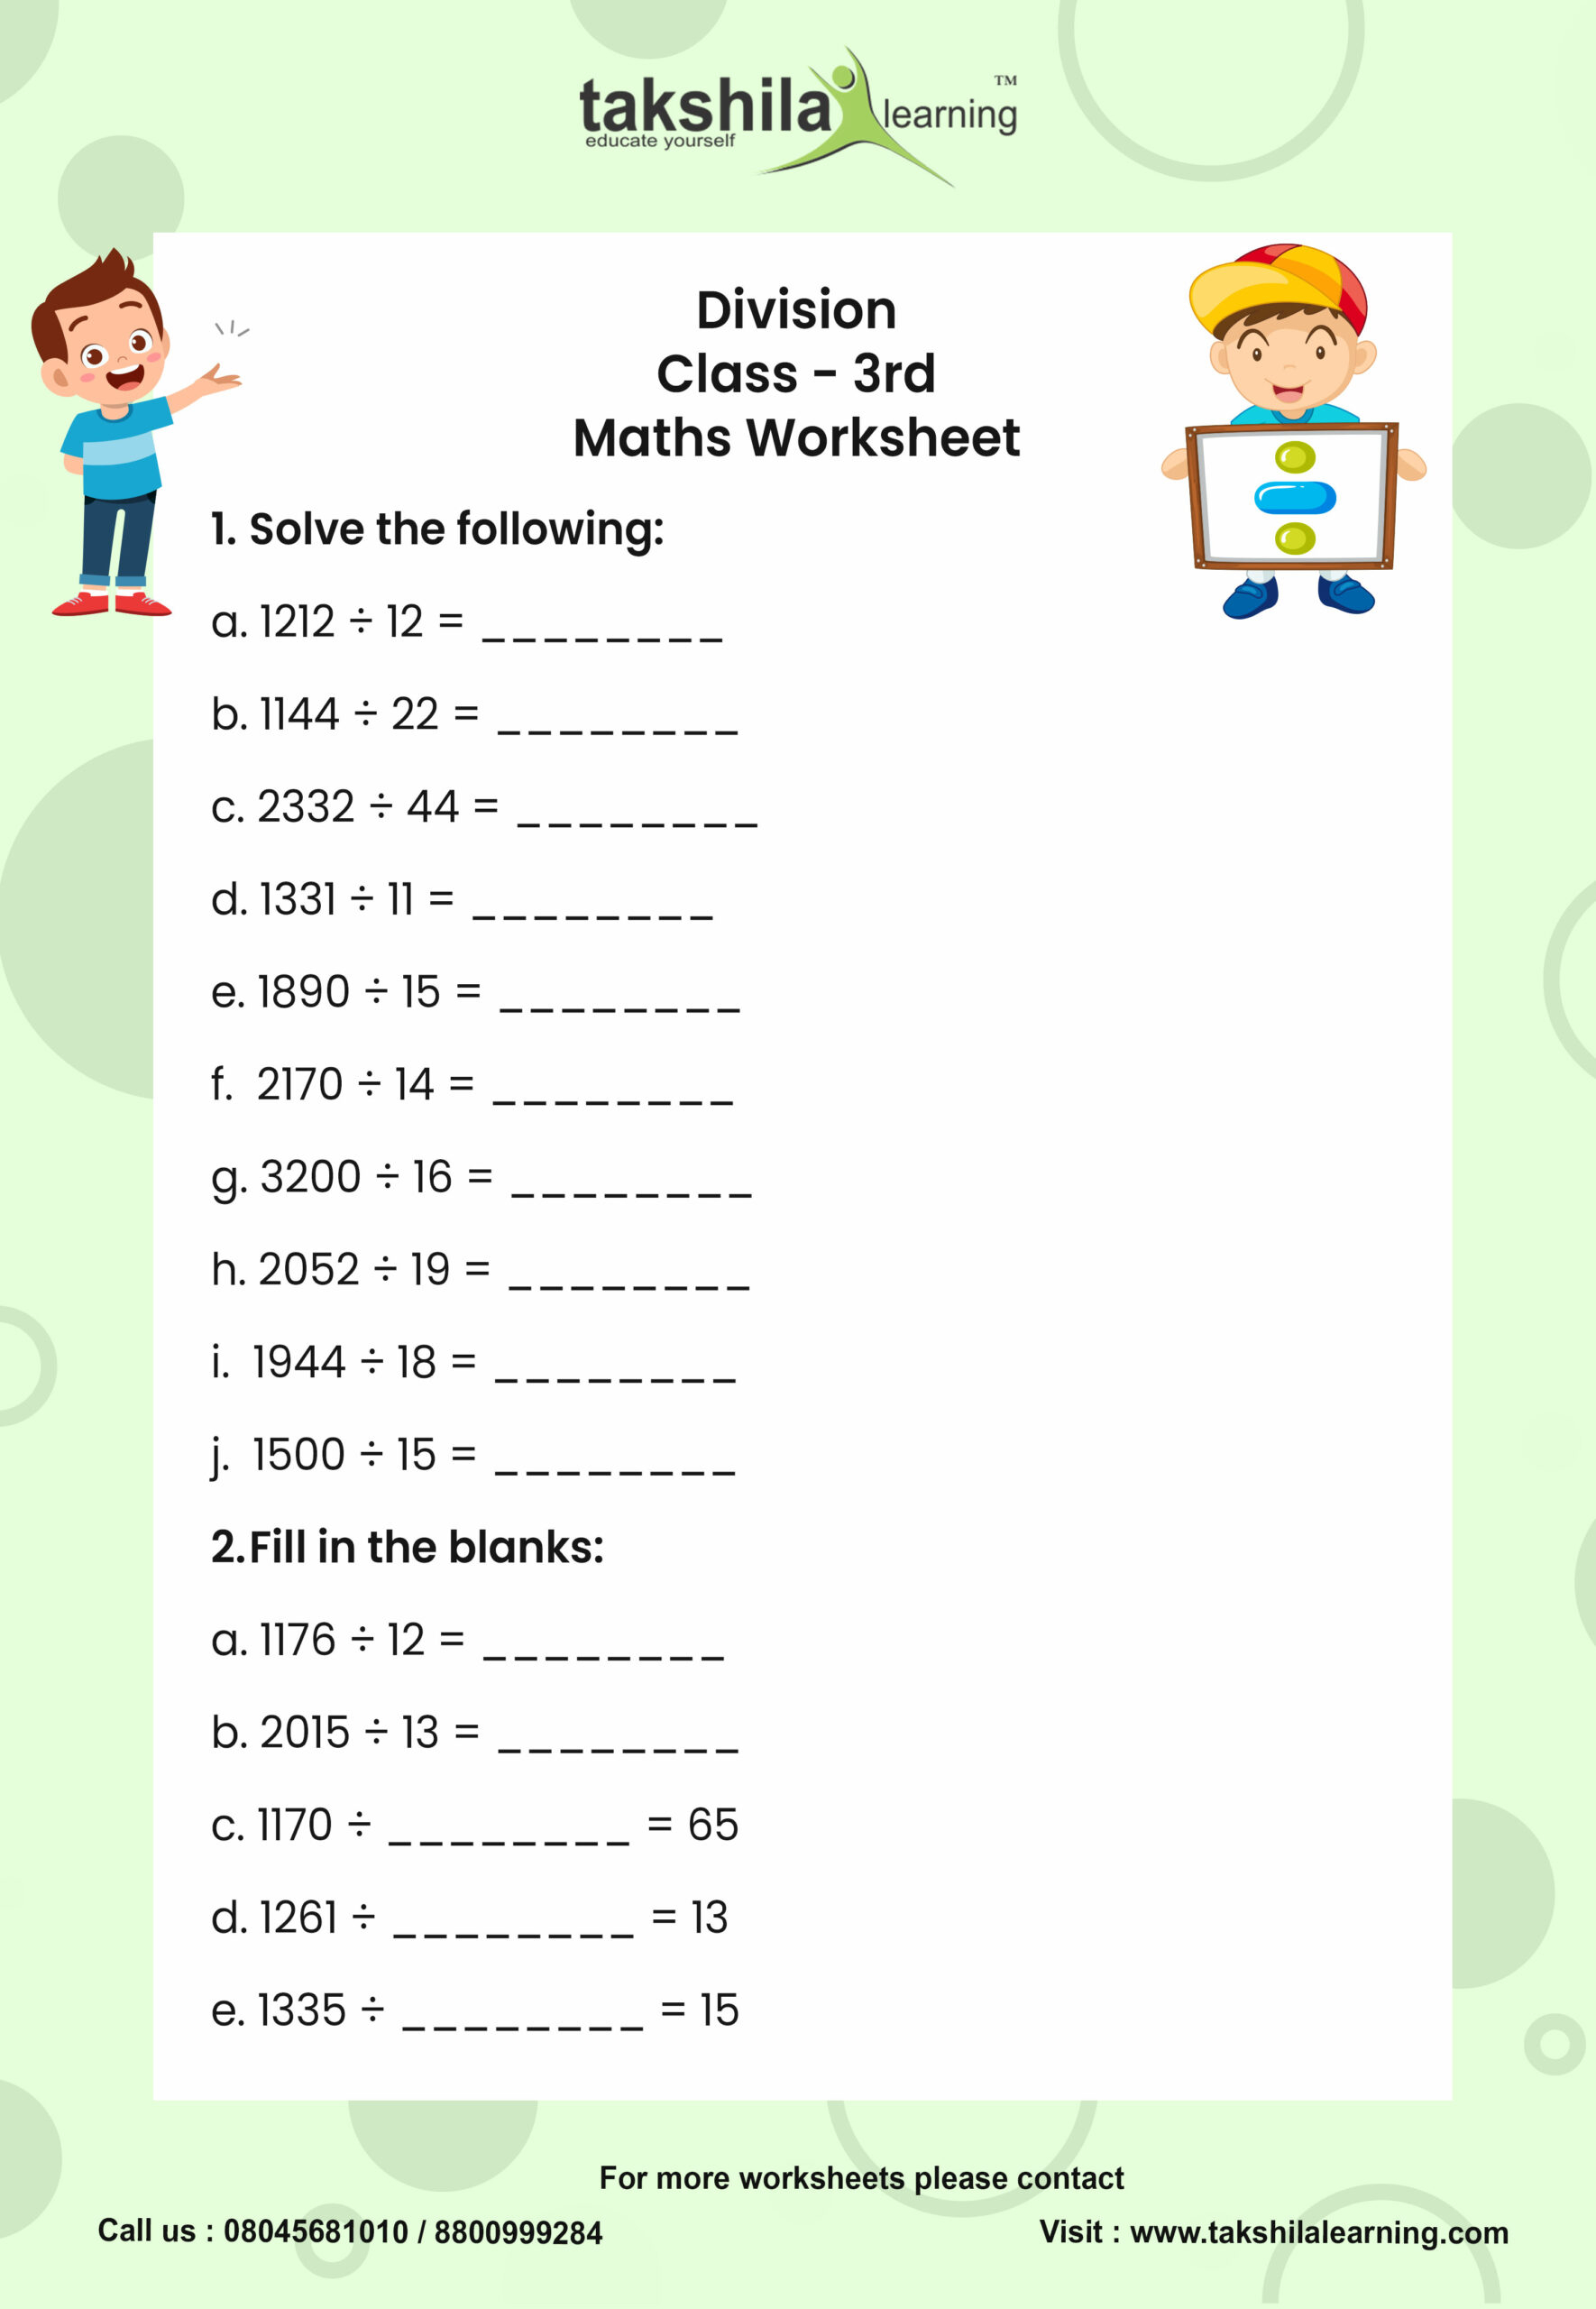 Division Worksheet For Class 3 Maths Maths Excercise